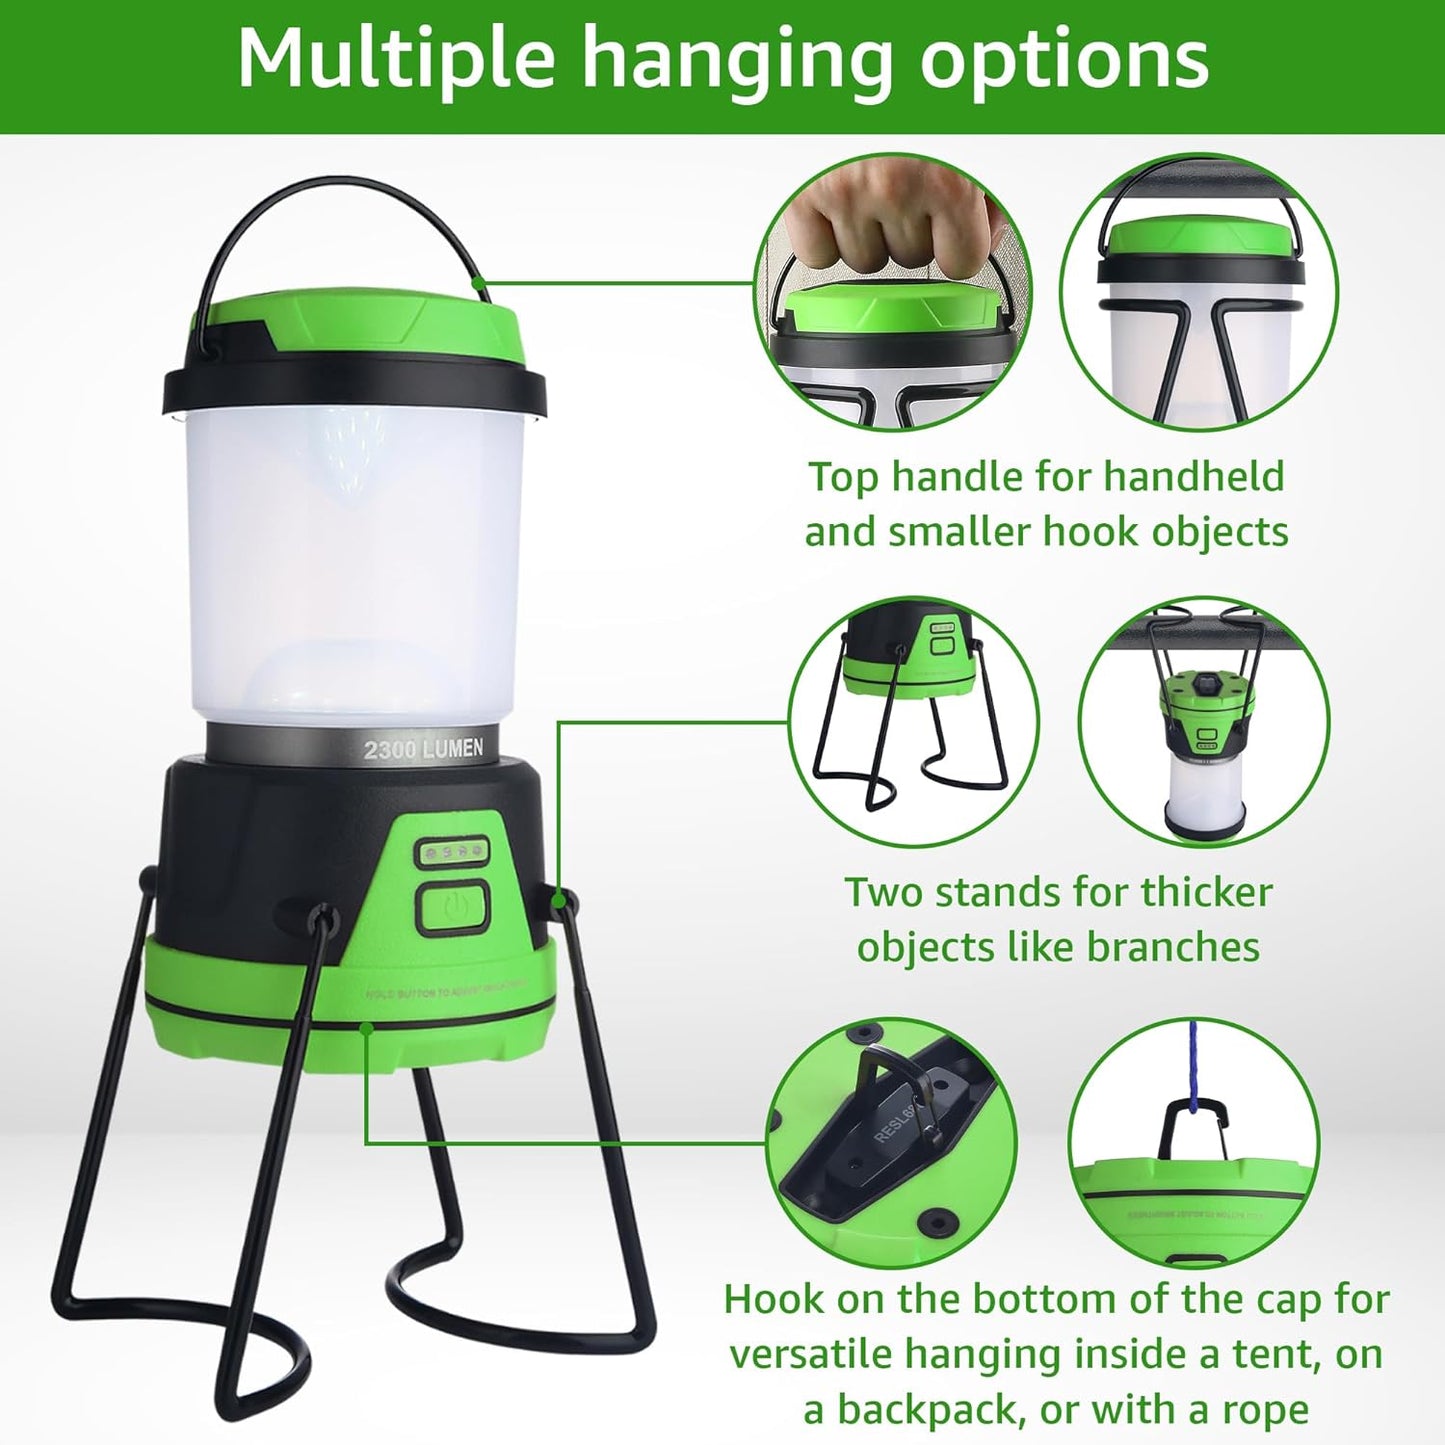 Rechargeable LED Camping Lantern - Power Outages, Hurricanes, Emergency, Hiking, Outdoor - Bright Battery Powered Electric Survival Light with Built-in Power Bank- Portable and Waterproof Camp Lantern